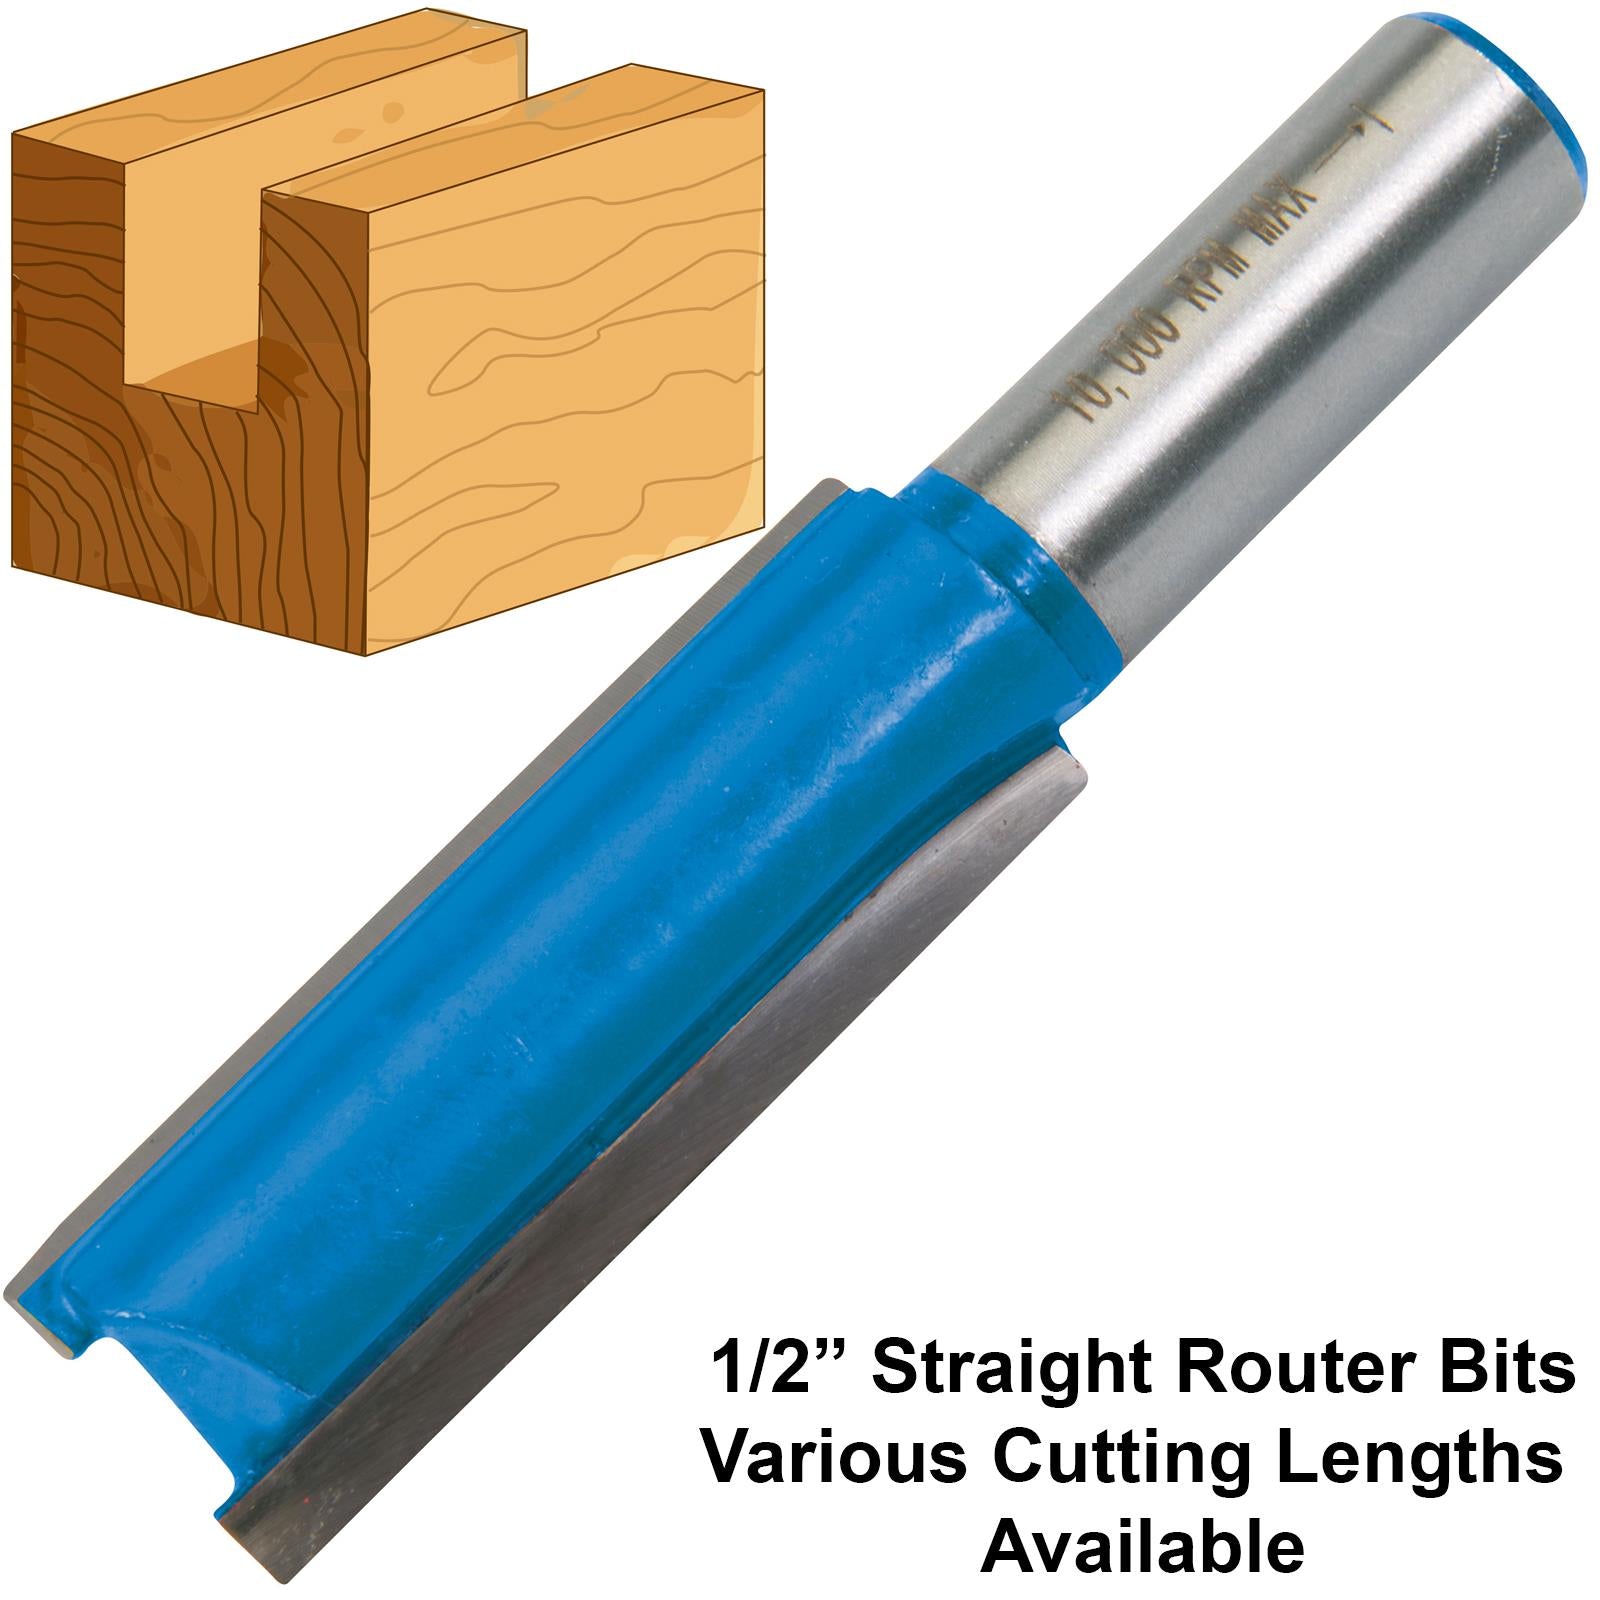 Silverline 1/2" Straight Imperial Cutter Router Bits